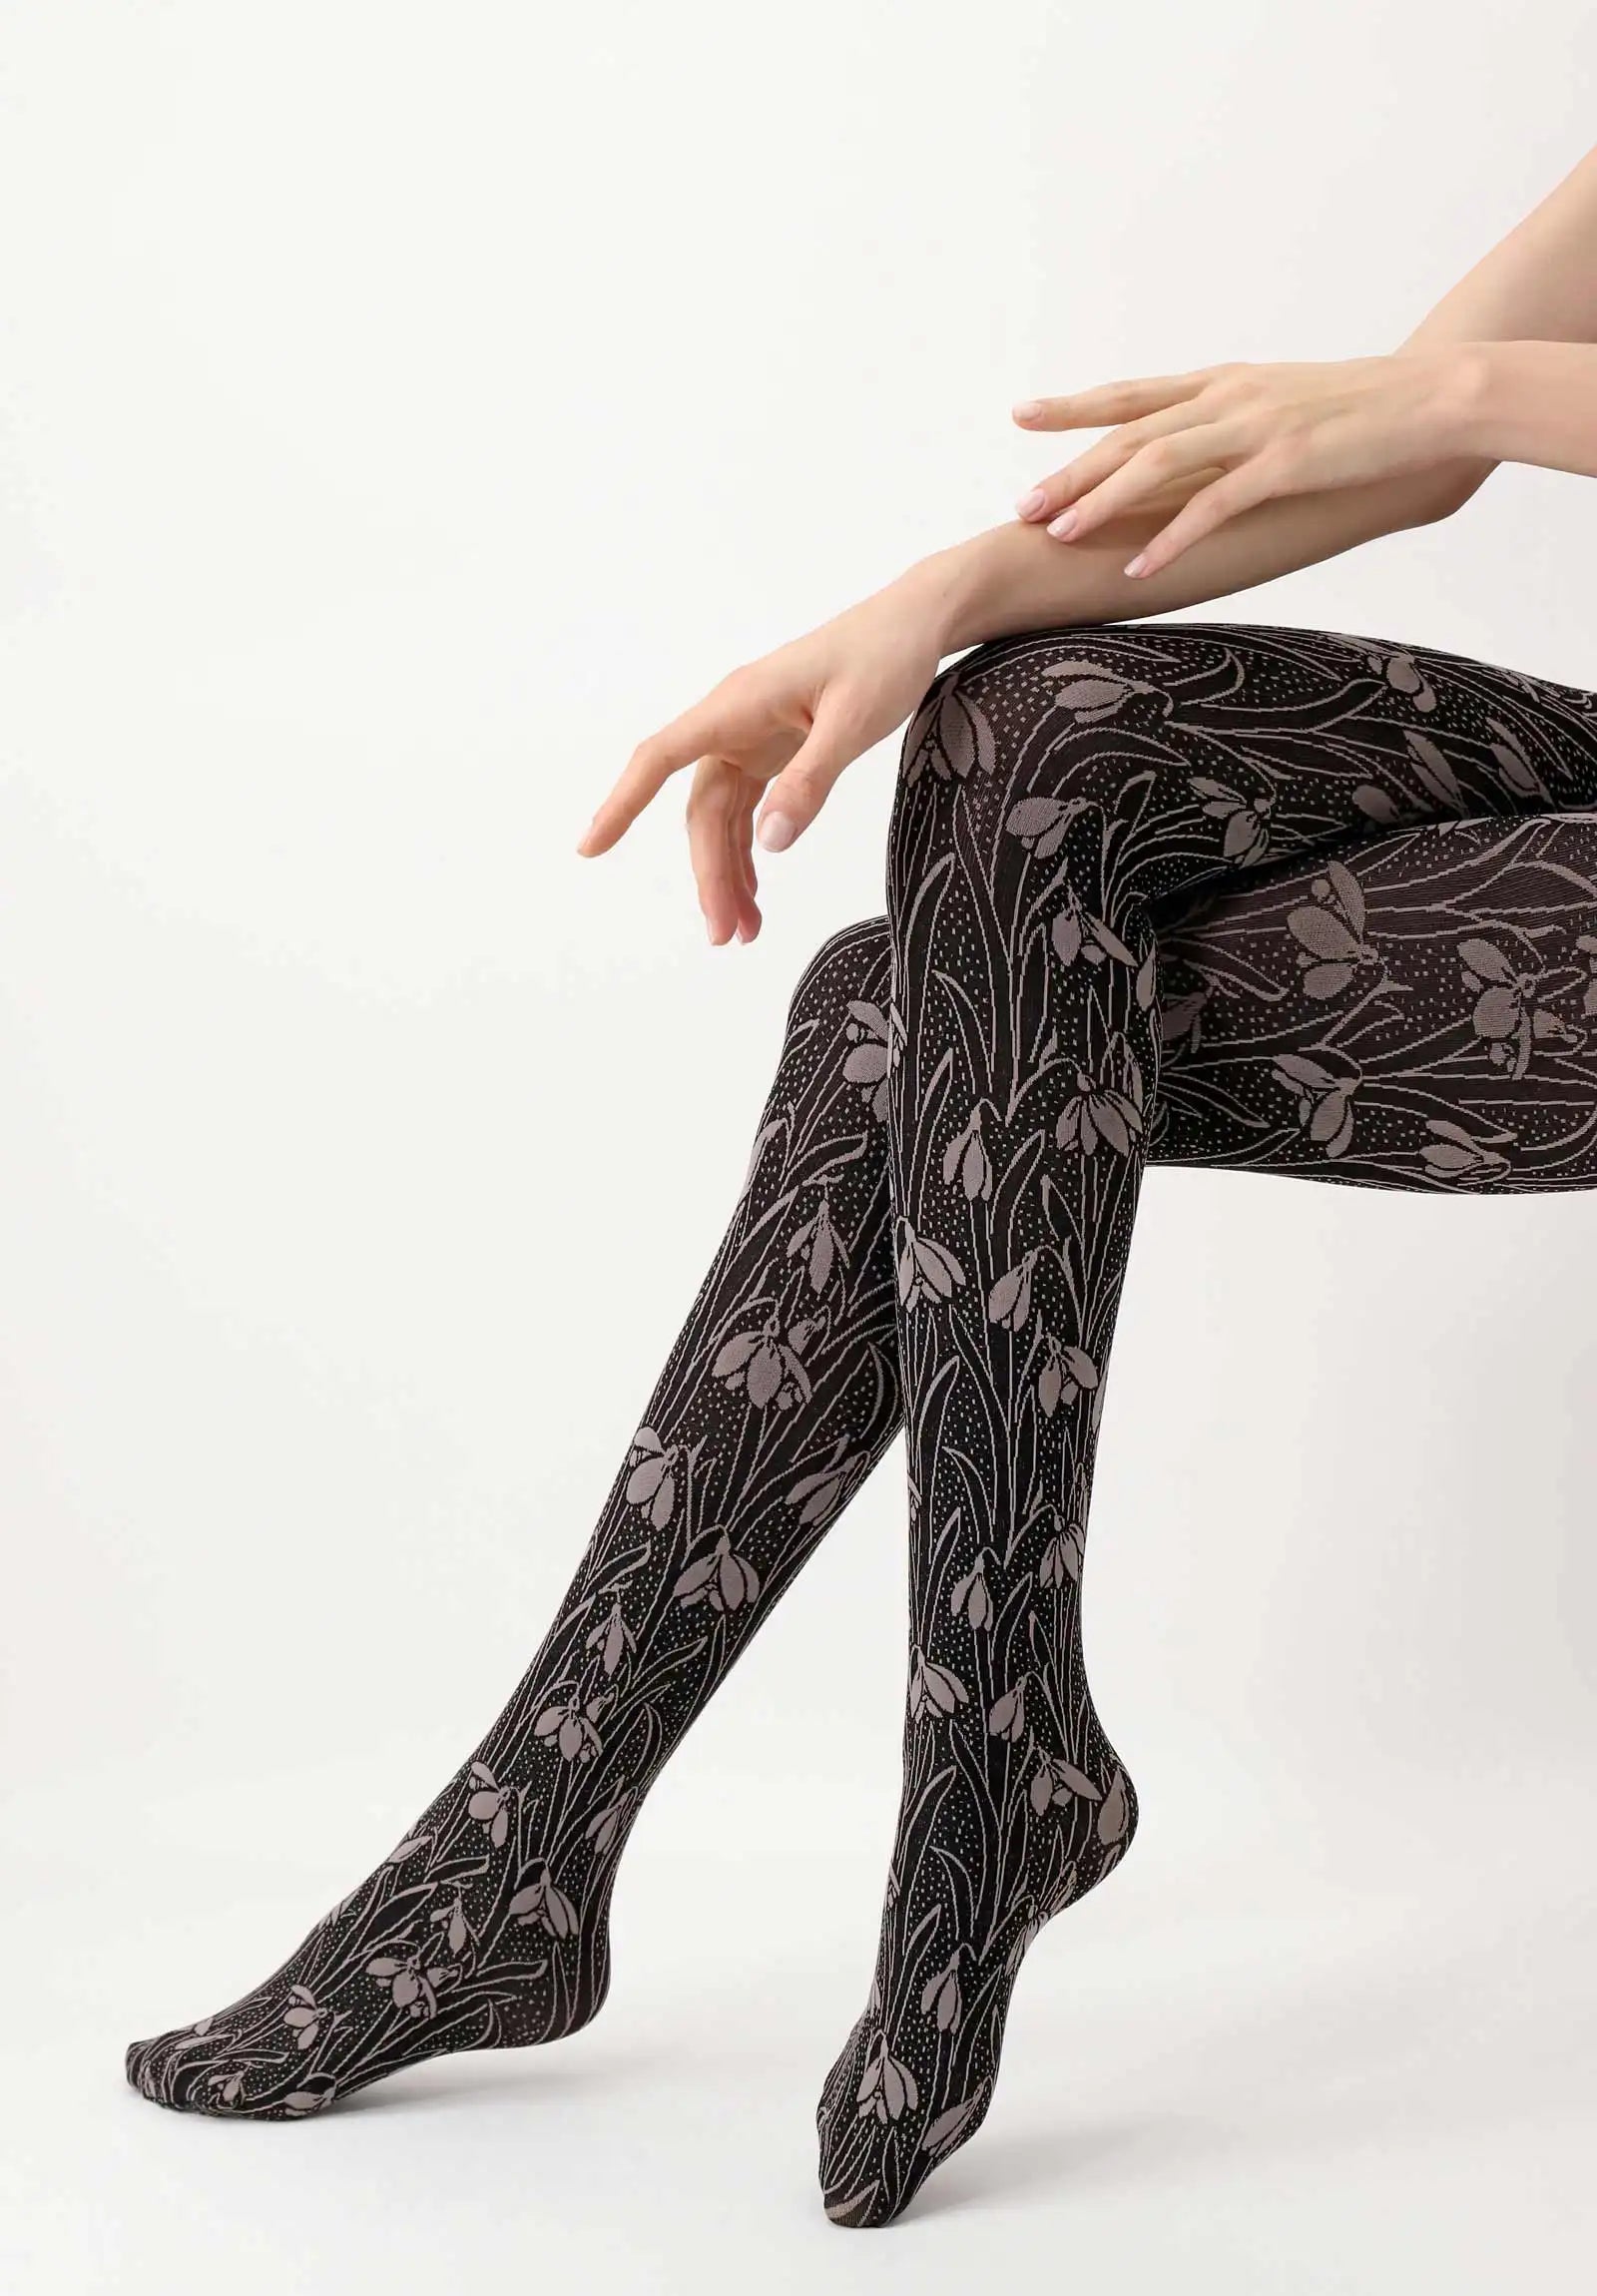 Oroblù I Love First Class Flowers Collant - Black opaque fashion tights with an all over snowdrops floral pattern in beige with a speckled background